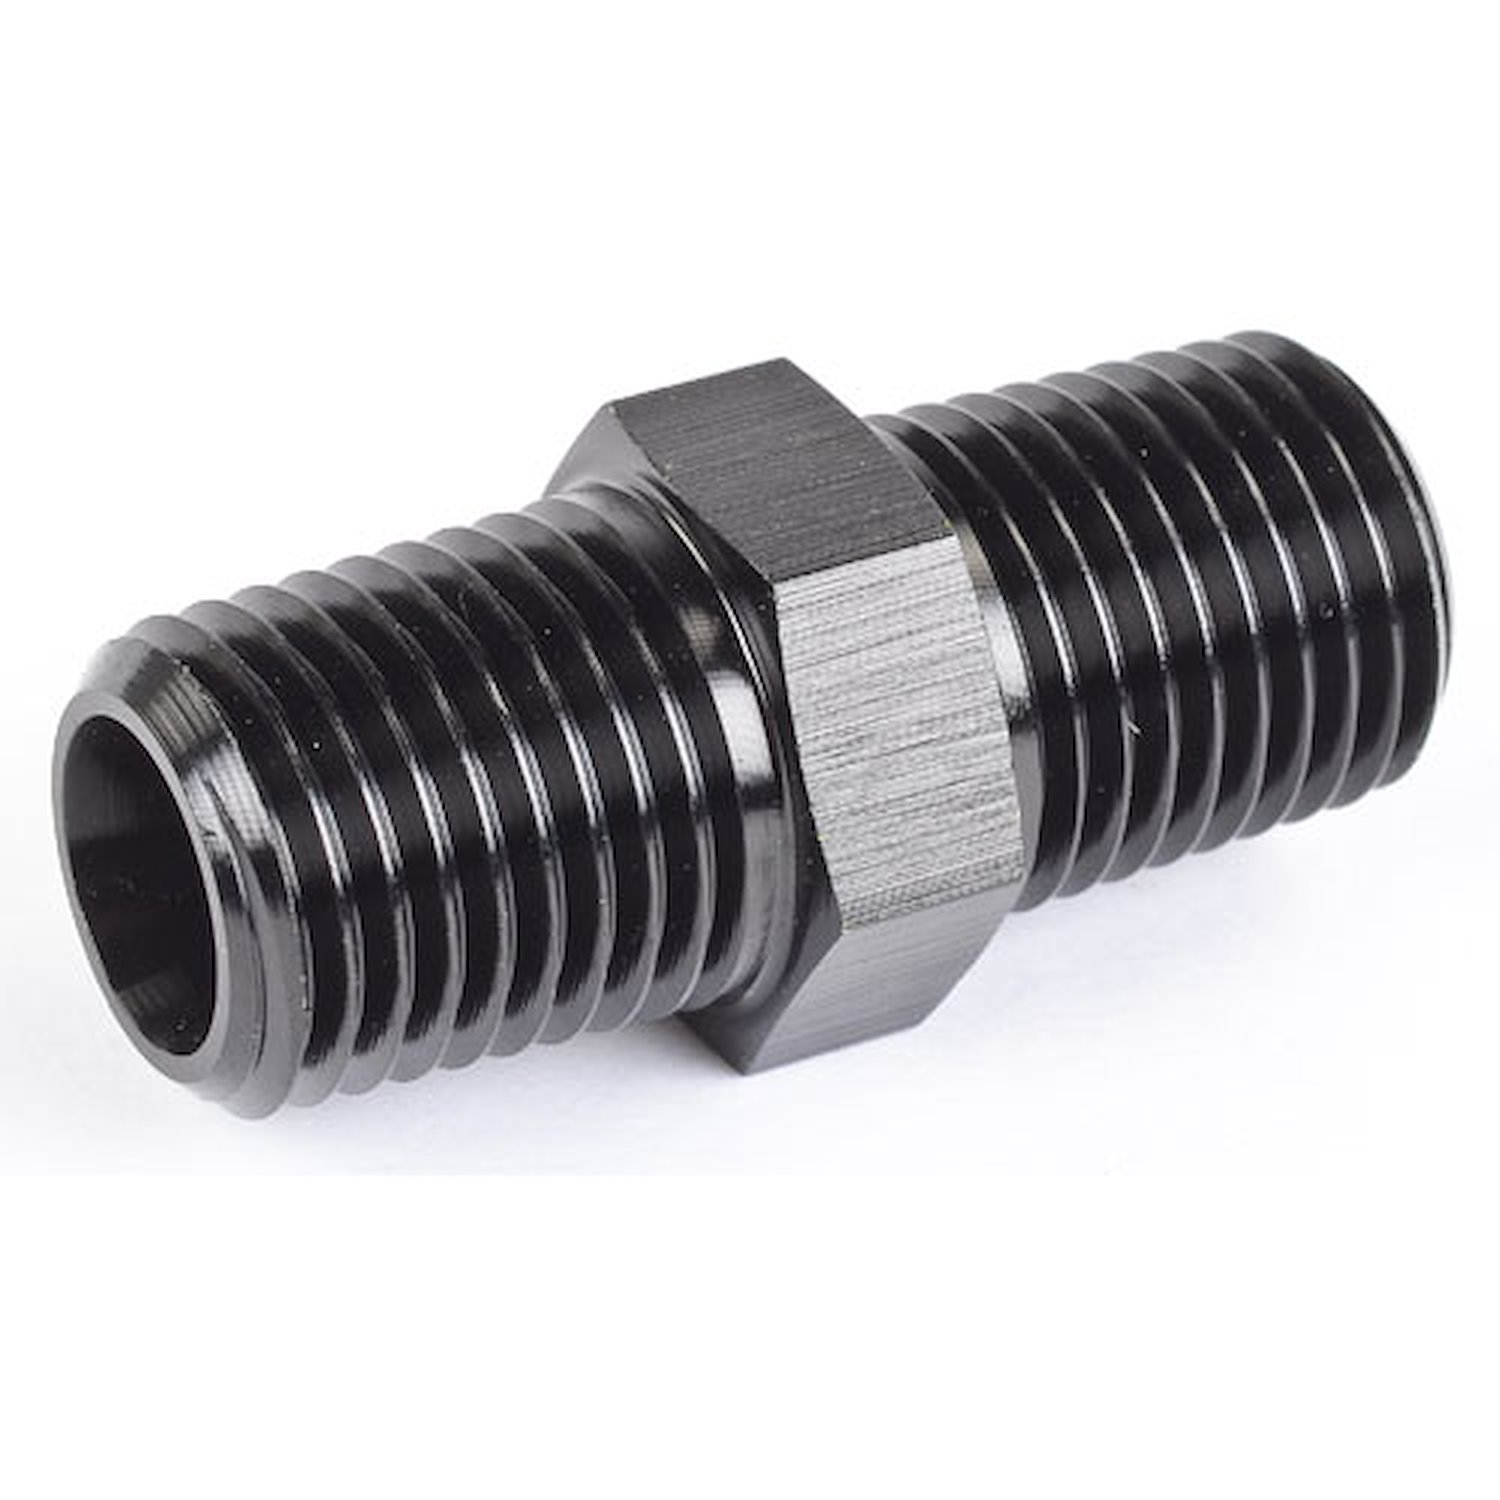 NPT to NPT Straight Union Fitting [1/8 in. NPT Male to 1/8 in. NPT Male, Black]